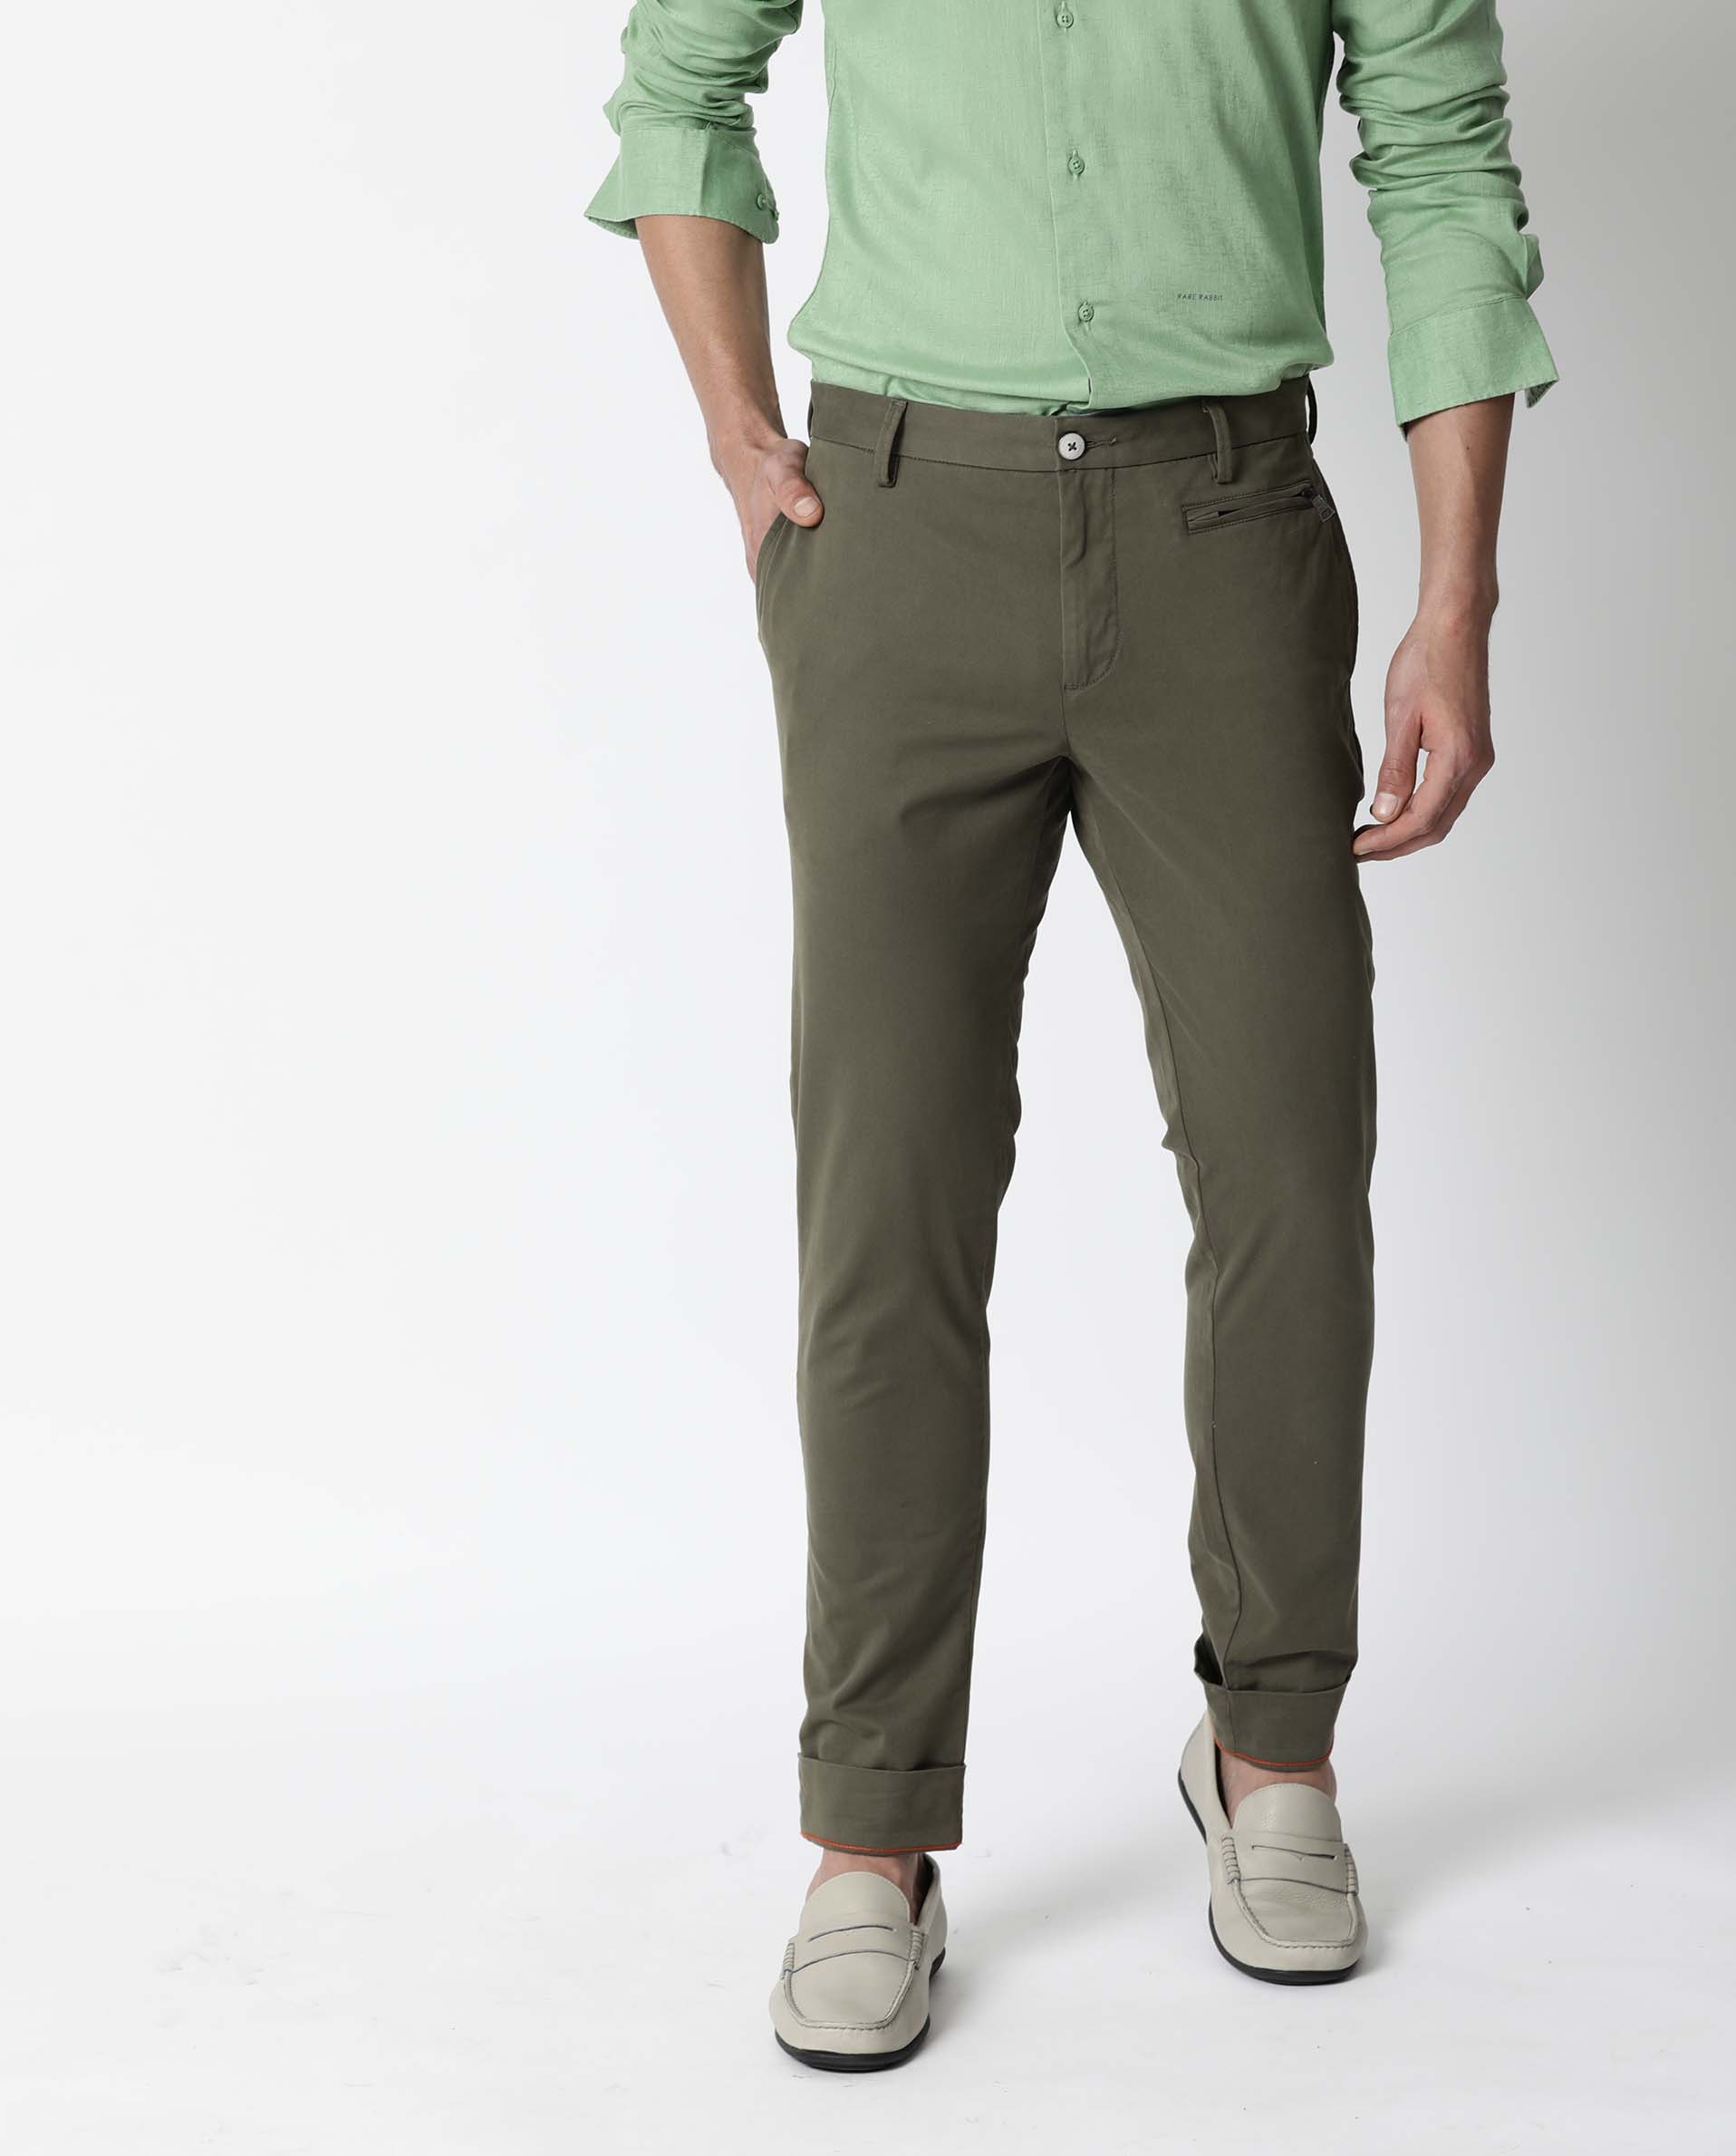 What Color Shirt Goes With Green Pants Pics  Ready Sleek